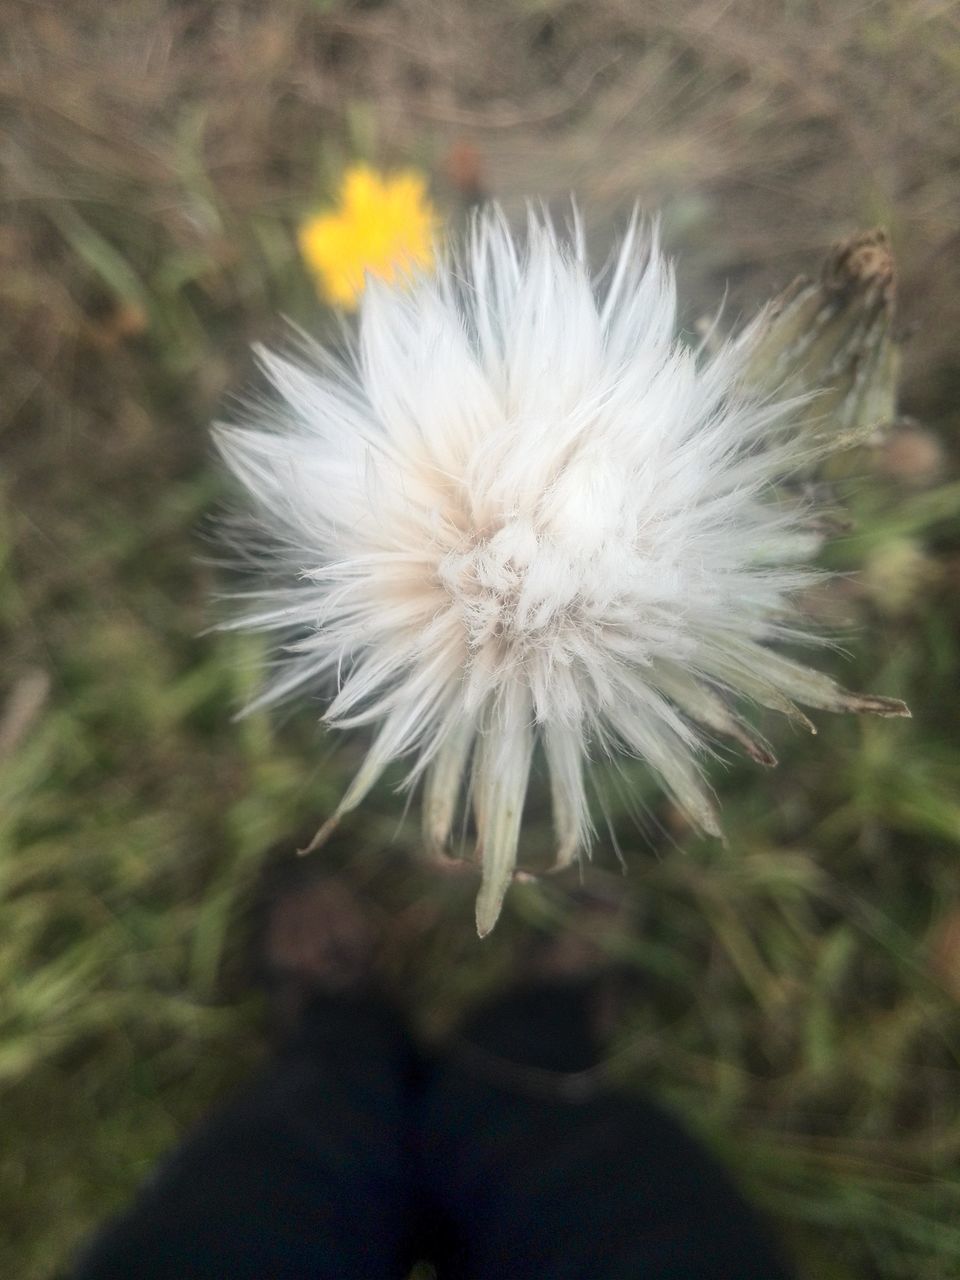 flower, fragility, dandelion, growth, freshness, single flower, flower head, close-up, beauty in nature, nature, focus on foreground, white color, plant, softness, petal, selective focus, stem, blooming, outdoors, wildflower